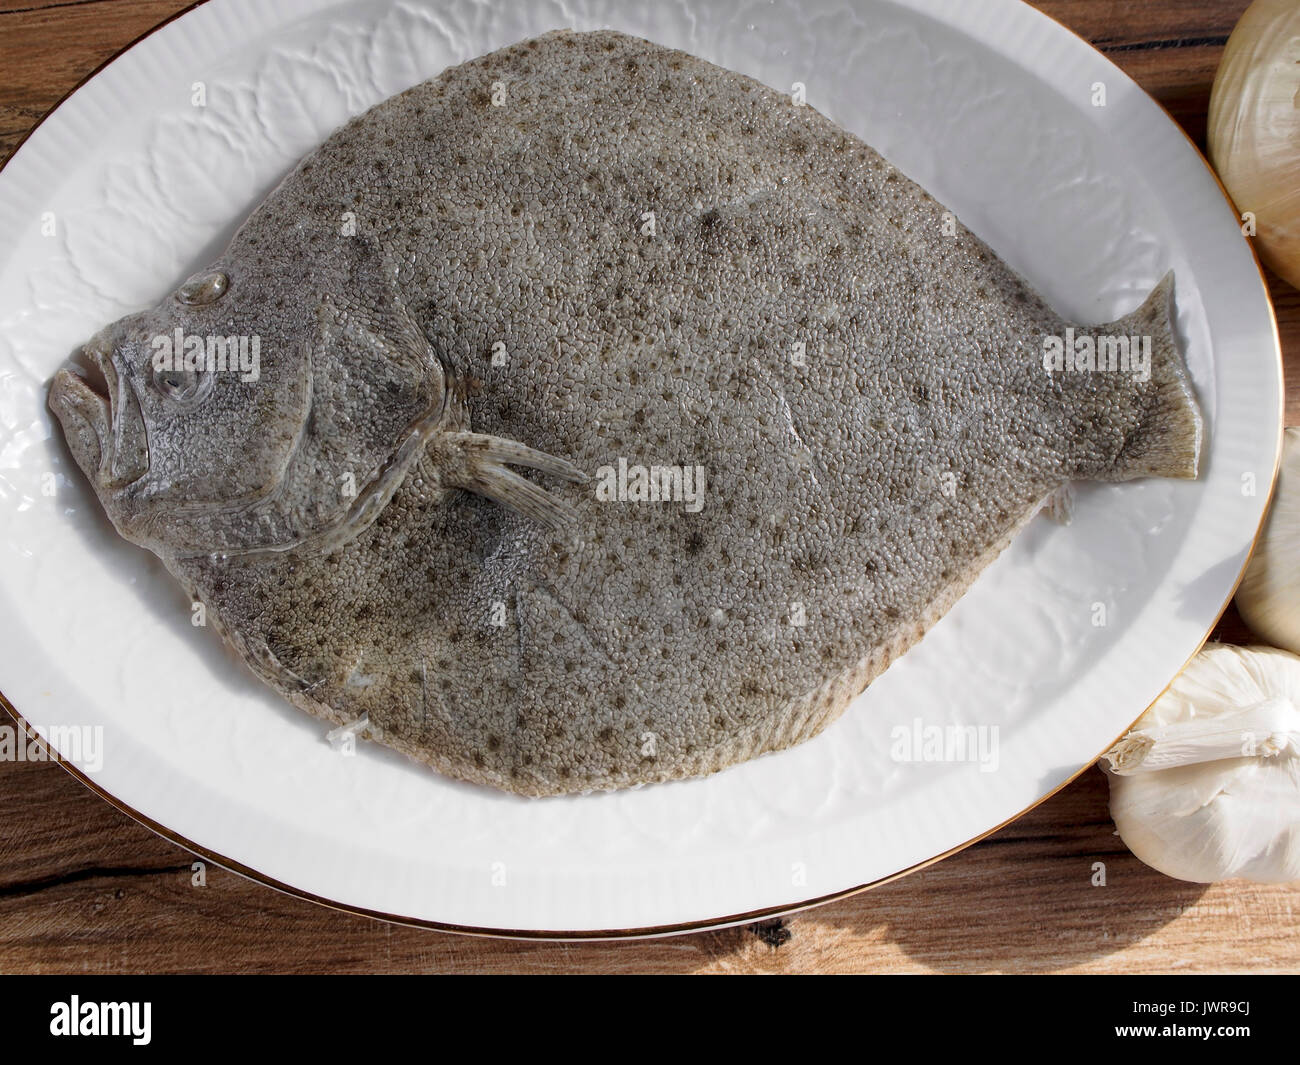 Turbot in a plate on wood background Stock Photo